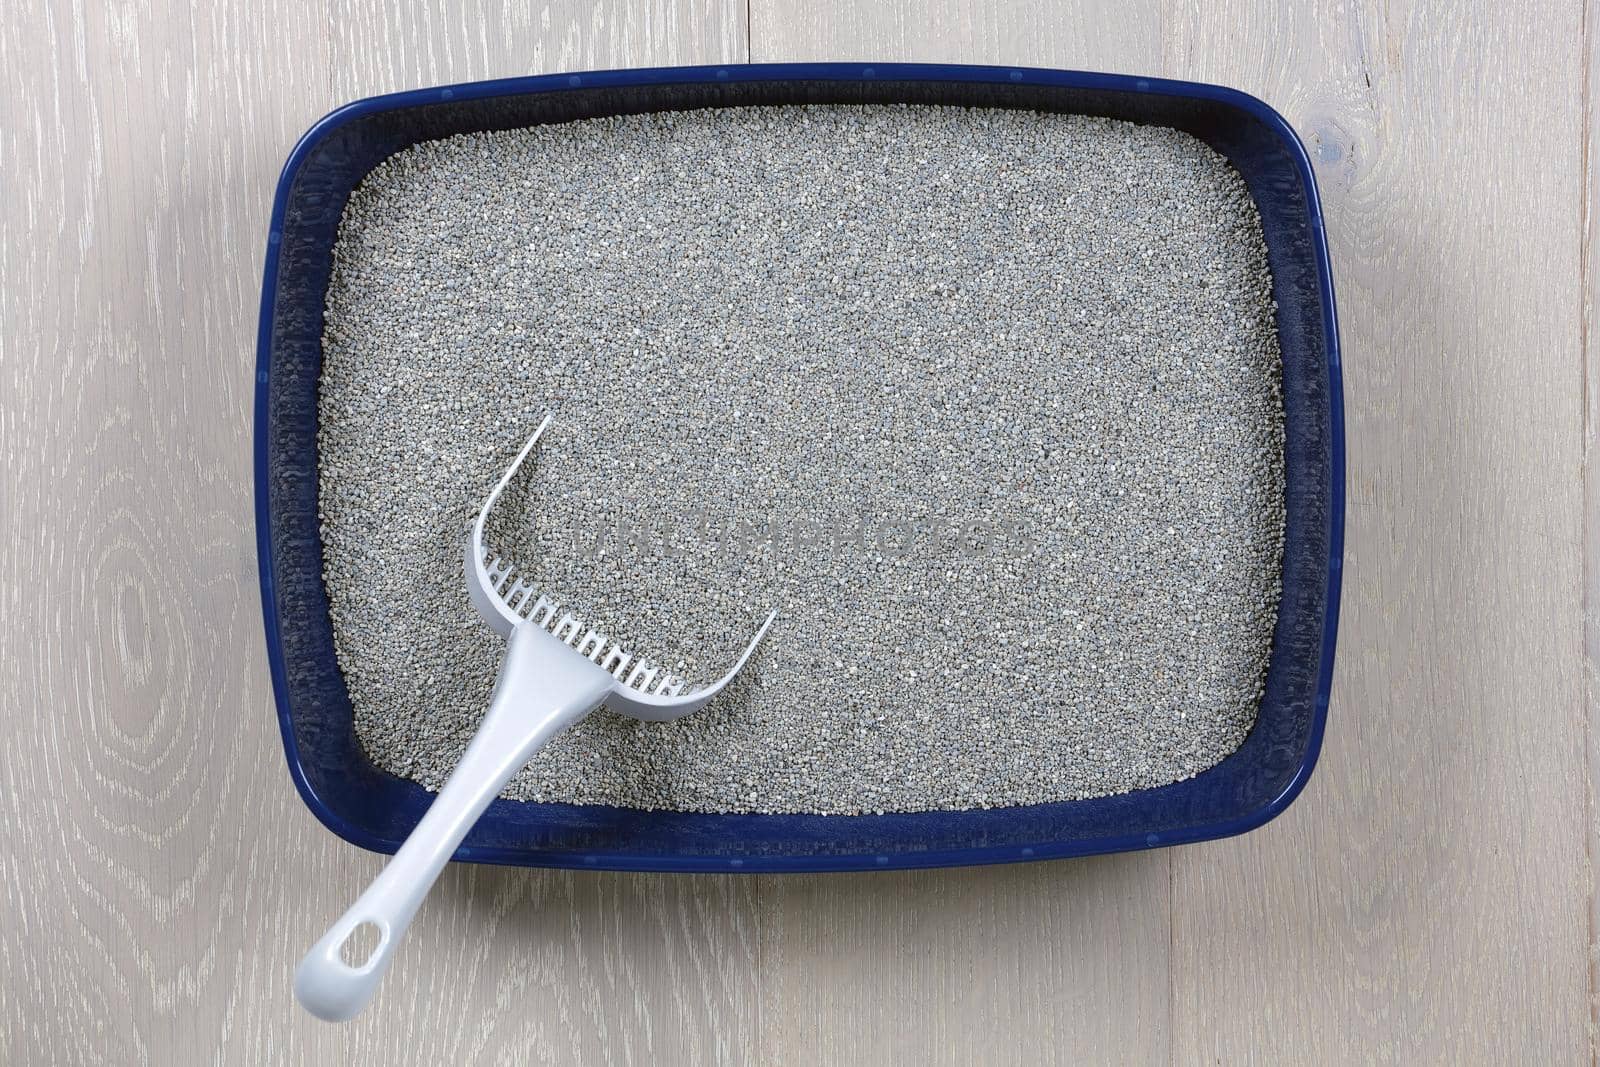 Top view of a blue cat litter tray and scoop by VivacityImages